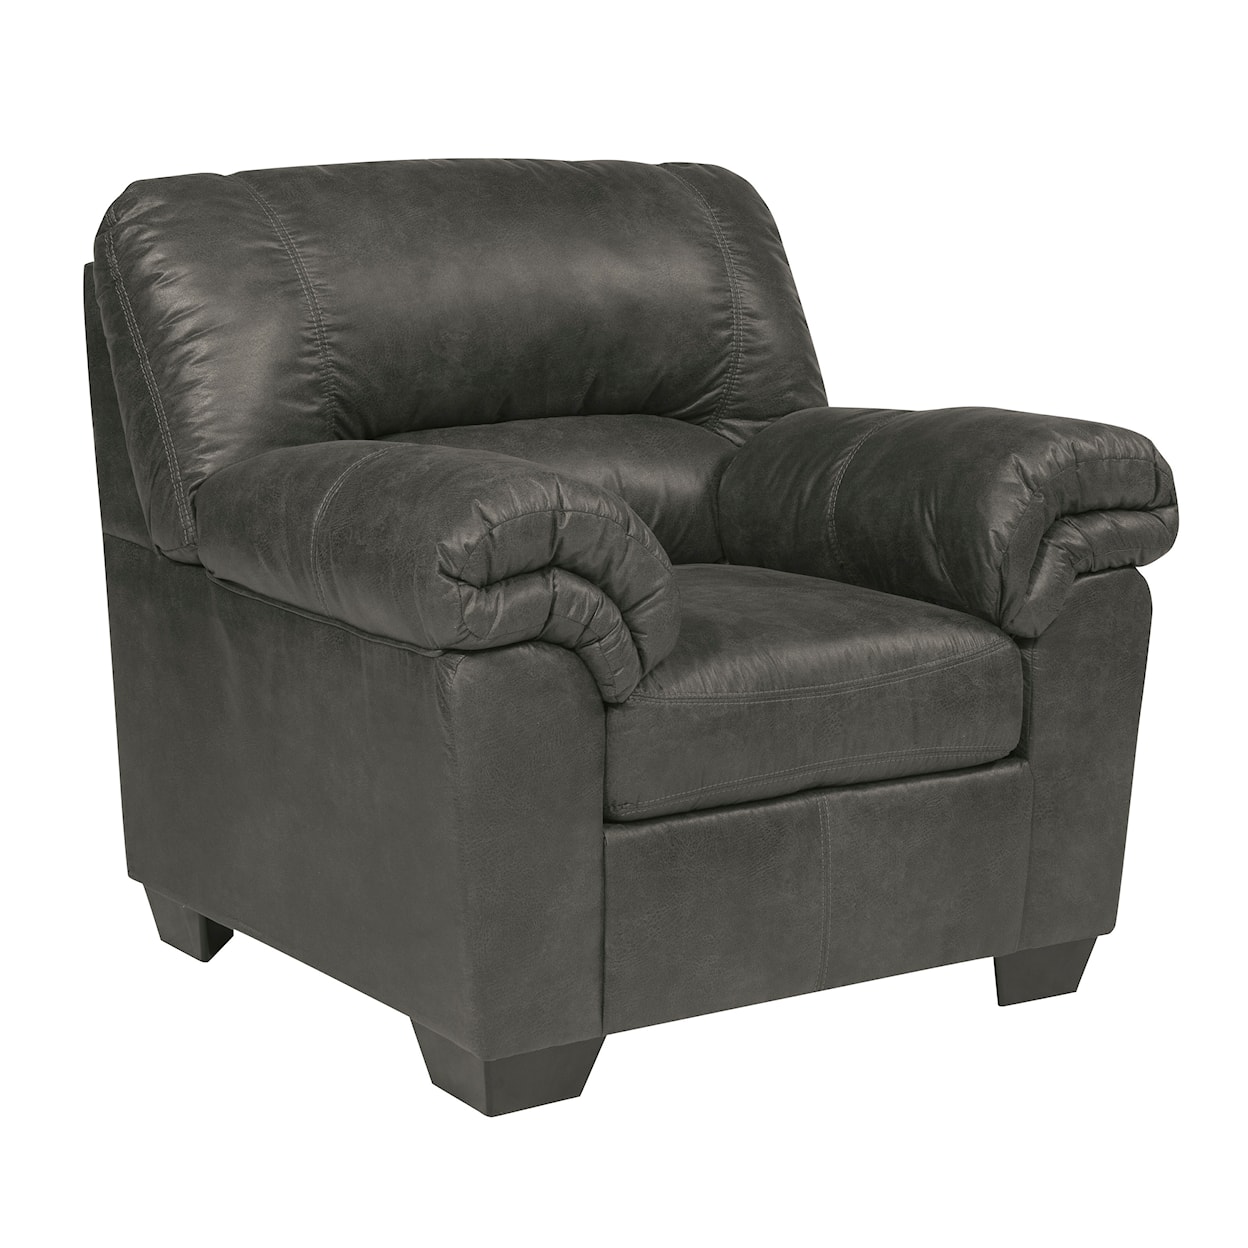 Signature Bladen Chair and Ottoman